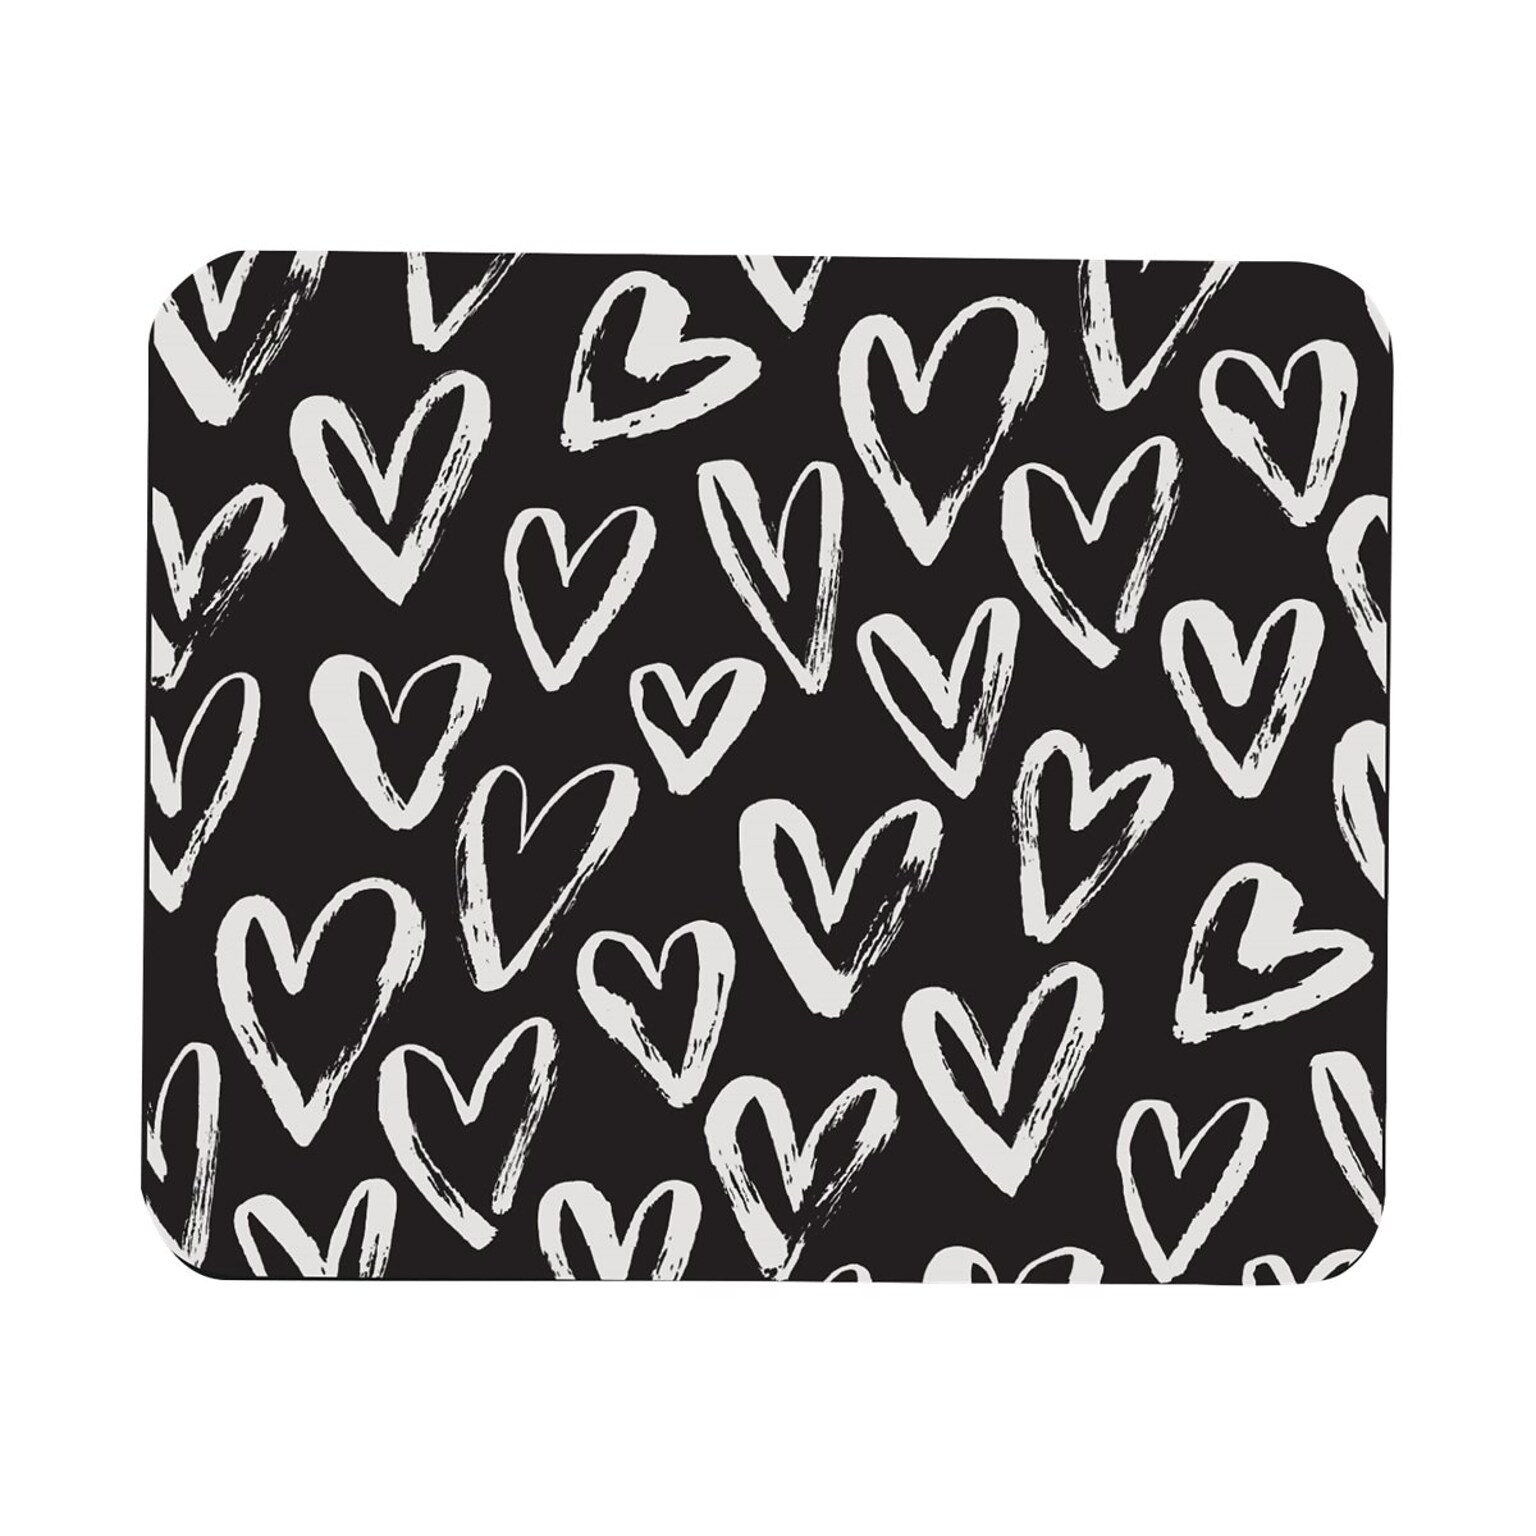 OTM Essentials Prints Series Non-Skid Mouse Pad, White Hearts (OP-MH-Z071A)